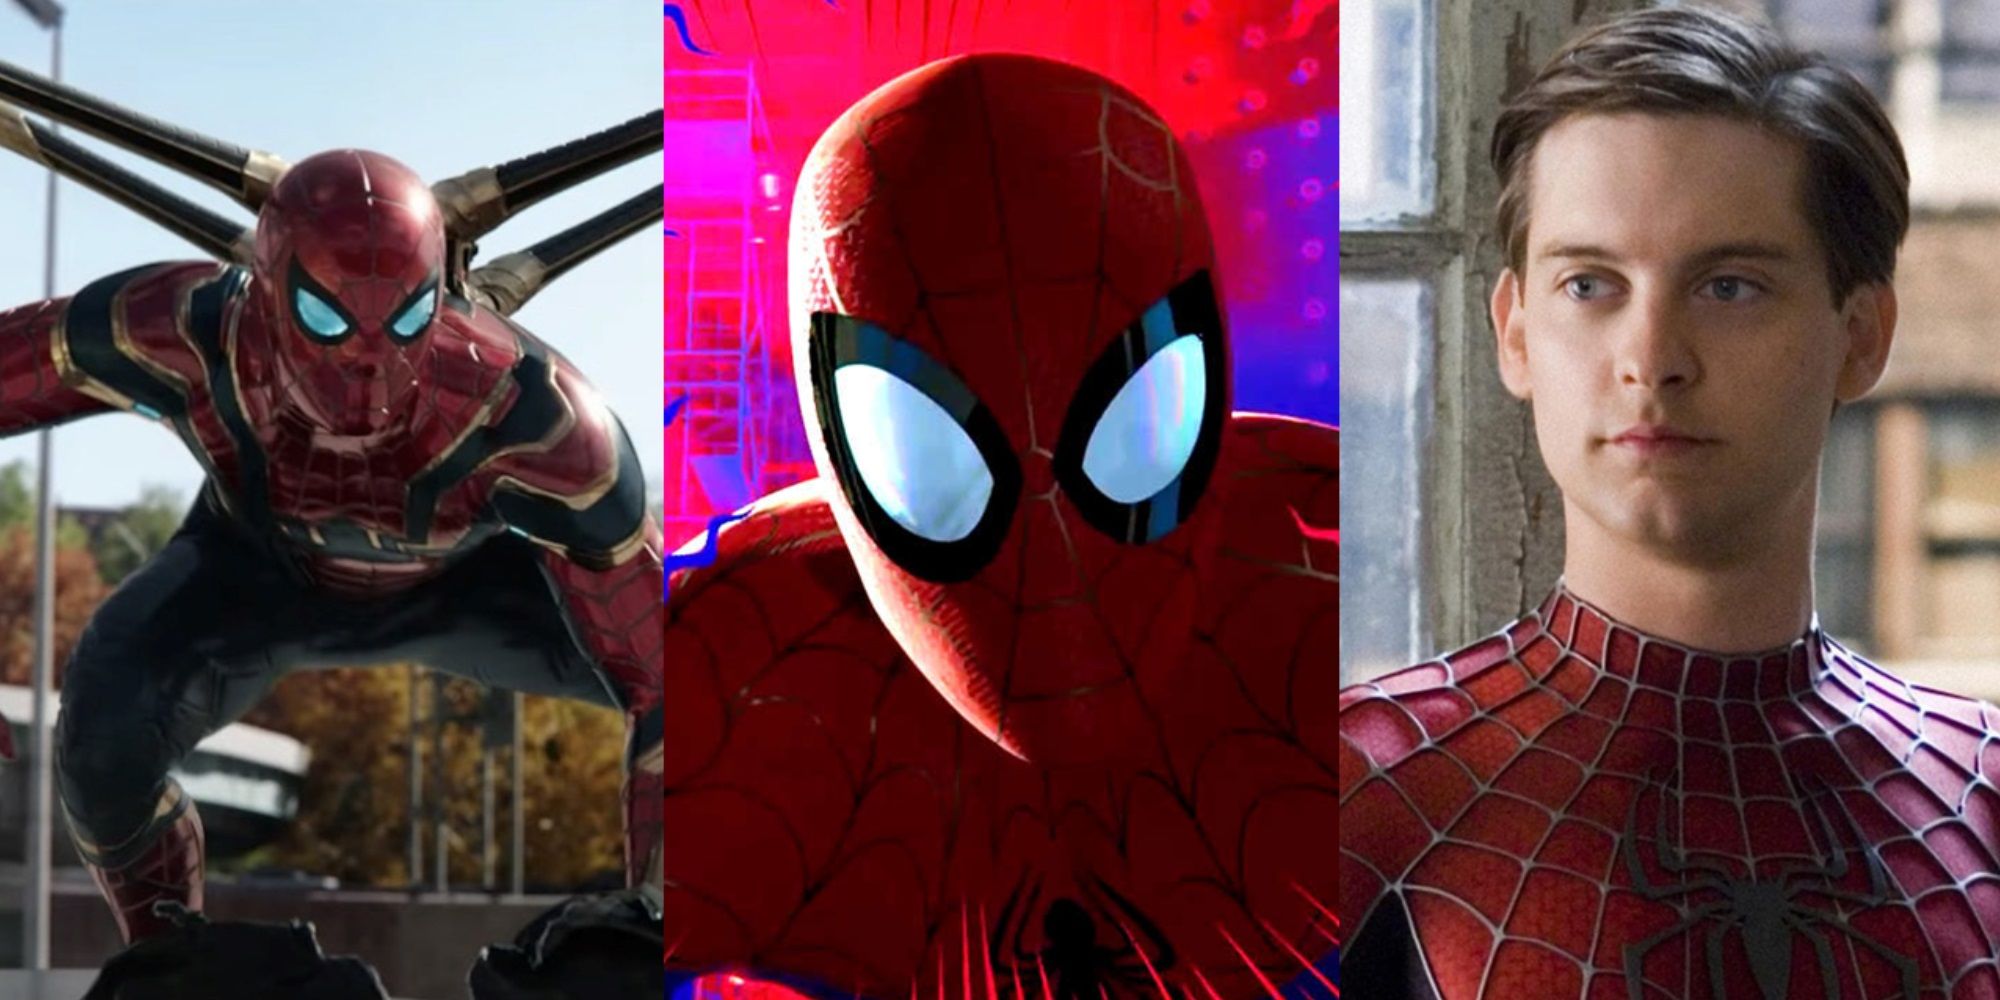 The Spider-Man movies ranked